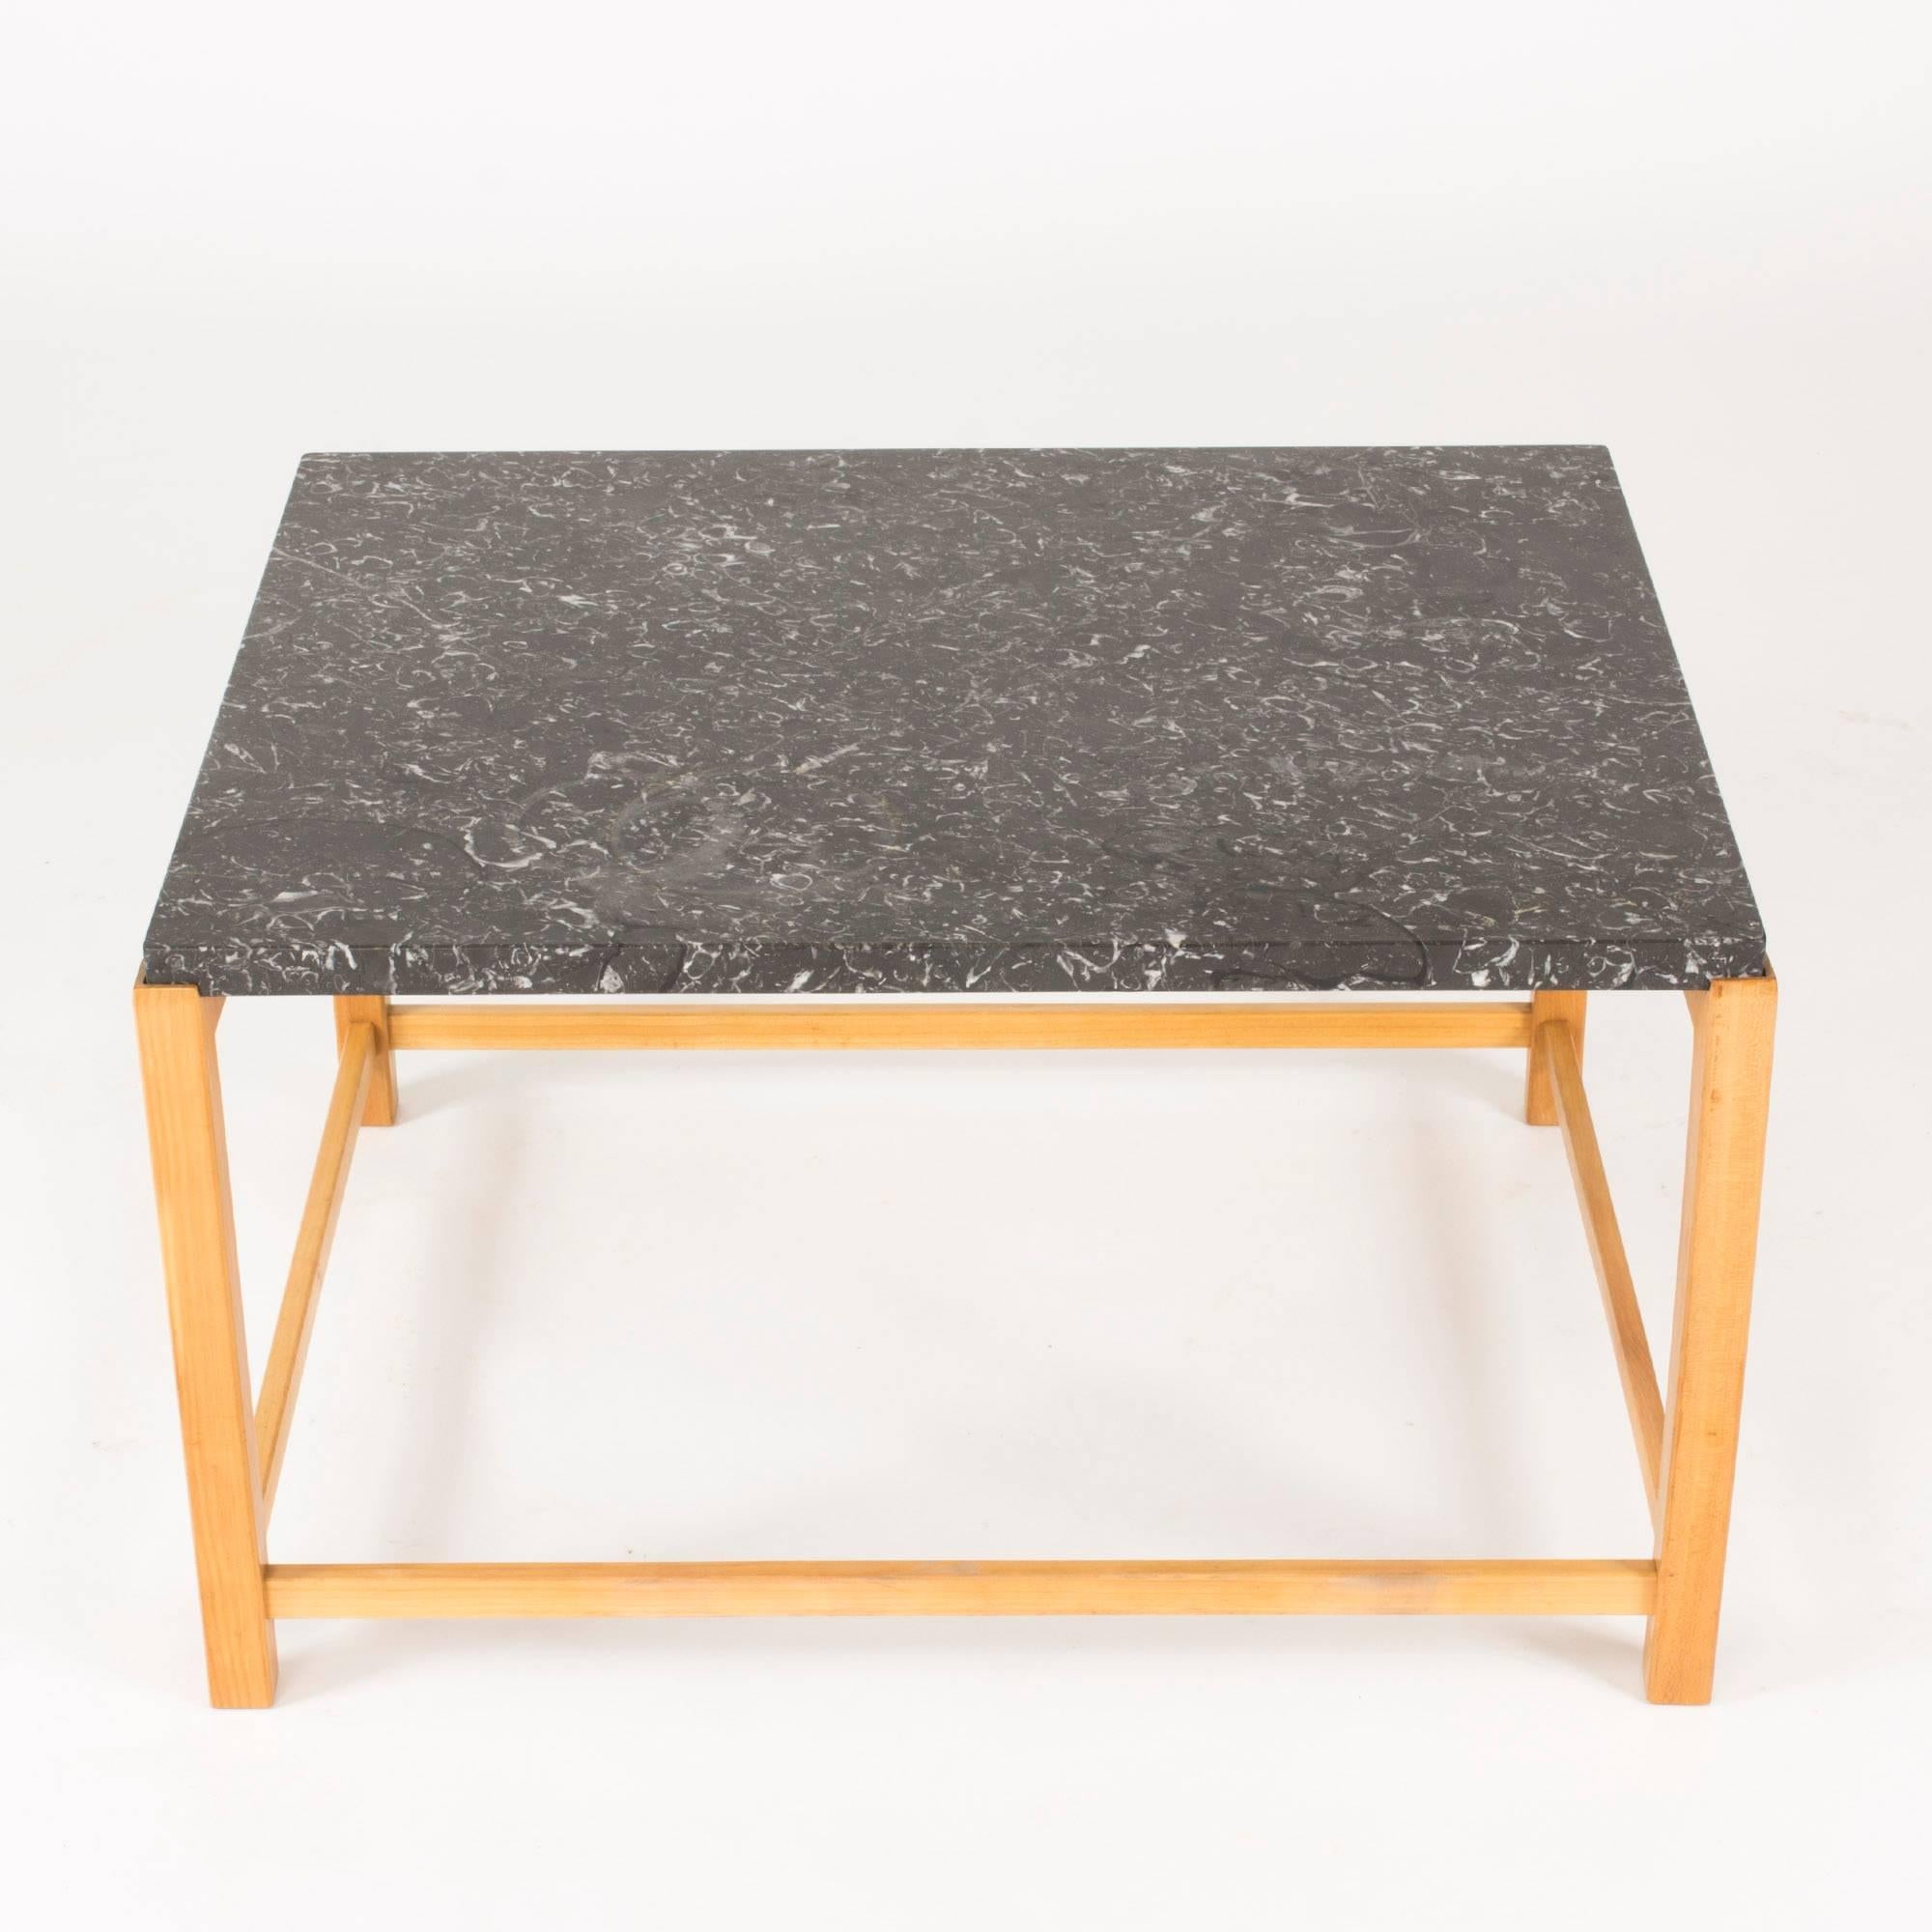 Scandinavian Modern Marble-Top Coffee Table by Carl-Axel Acking